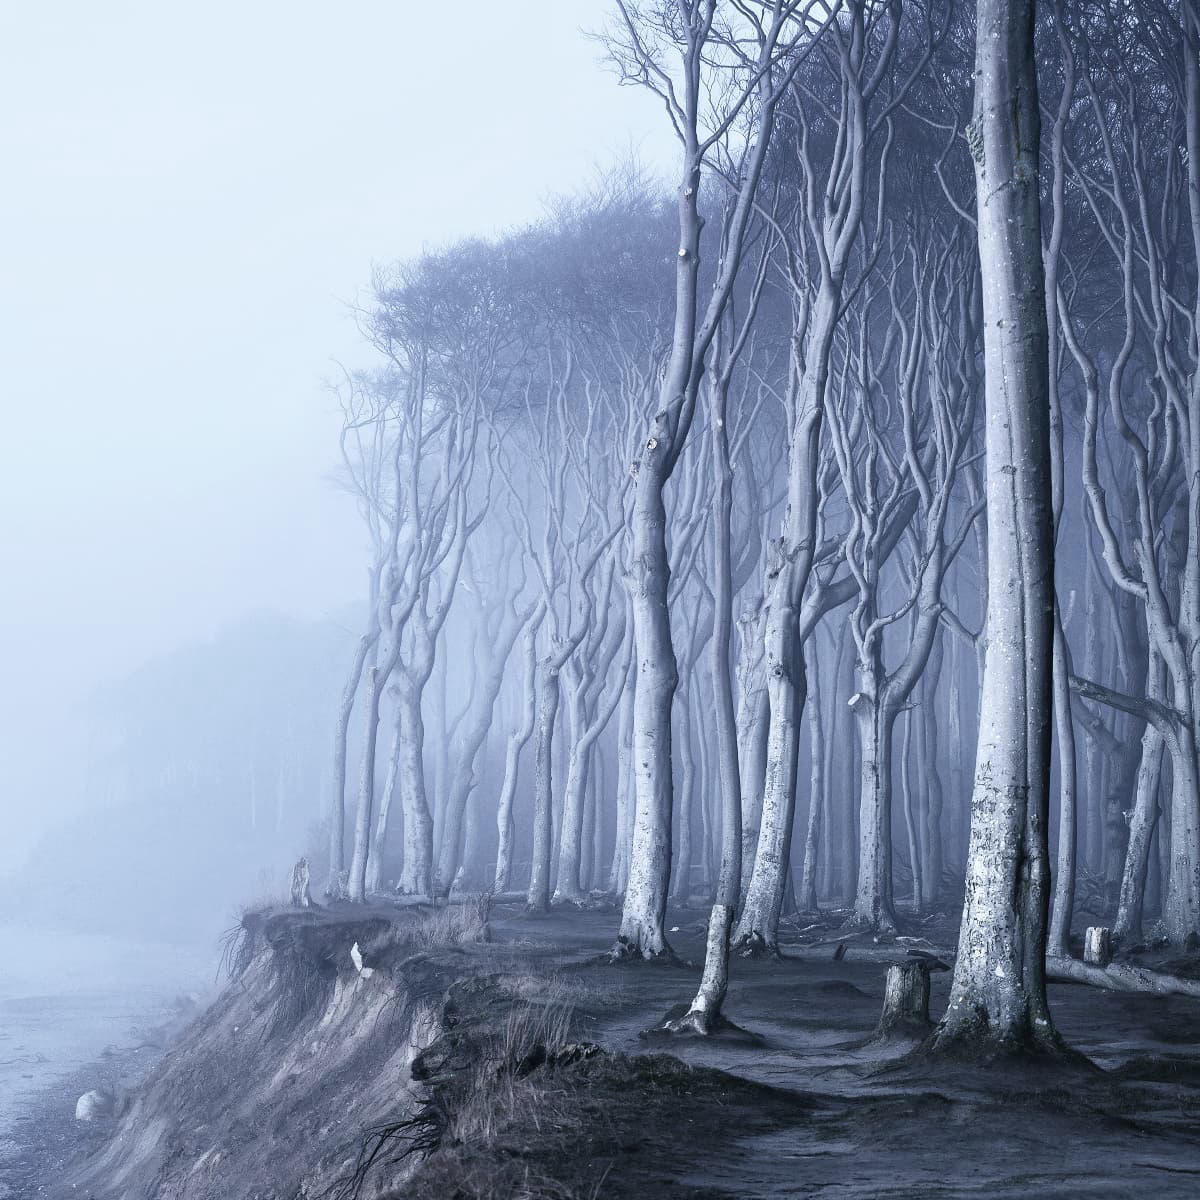 image  1 Kilian Schönberger - Dreaming of Beech Forests all over Germany